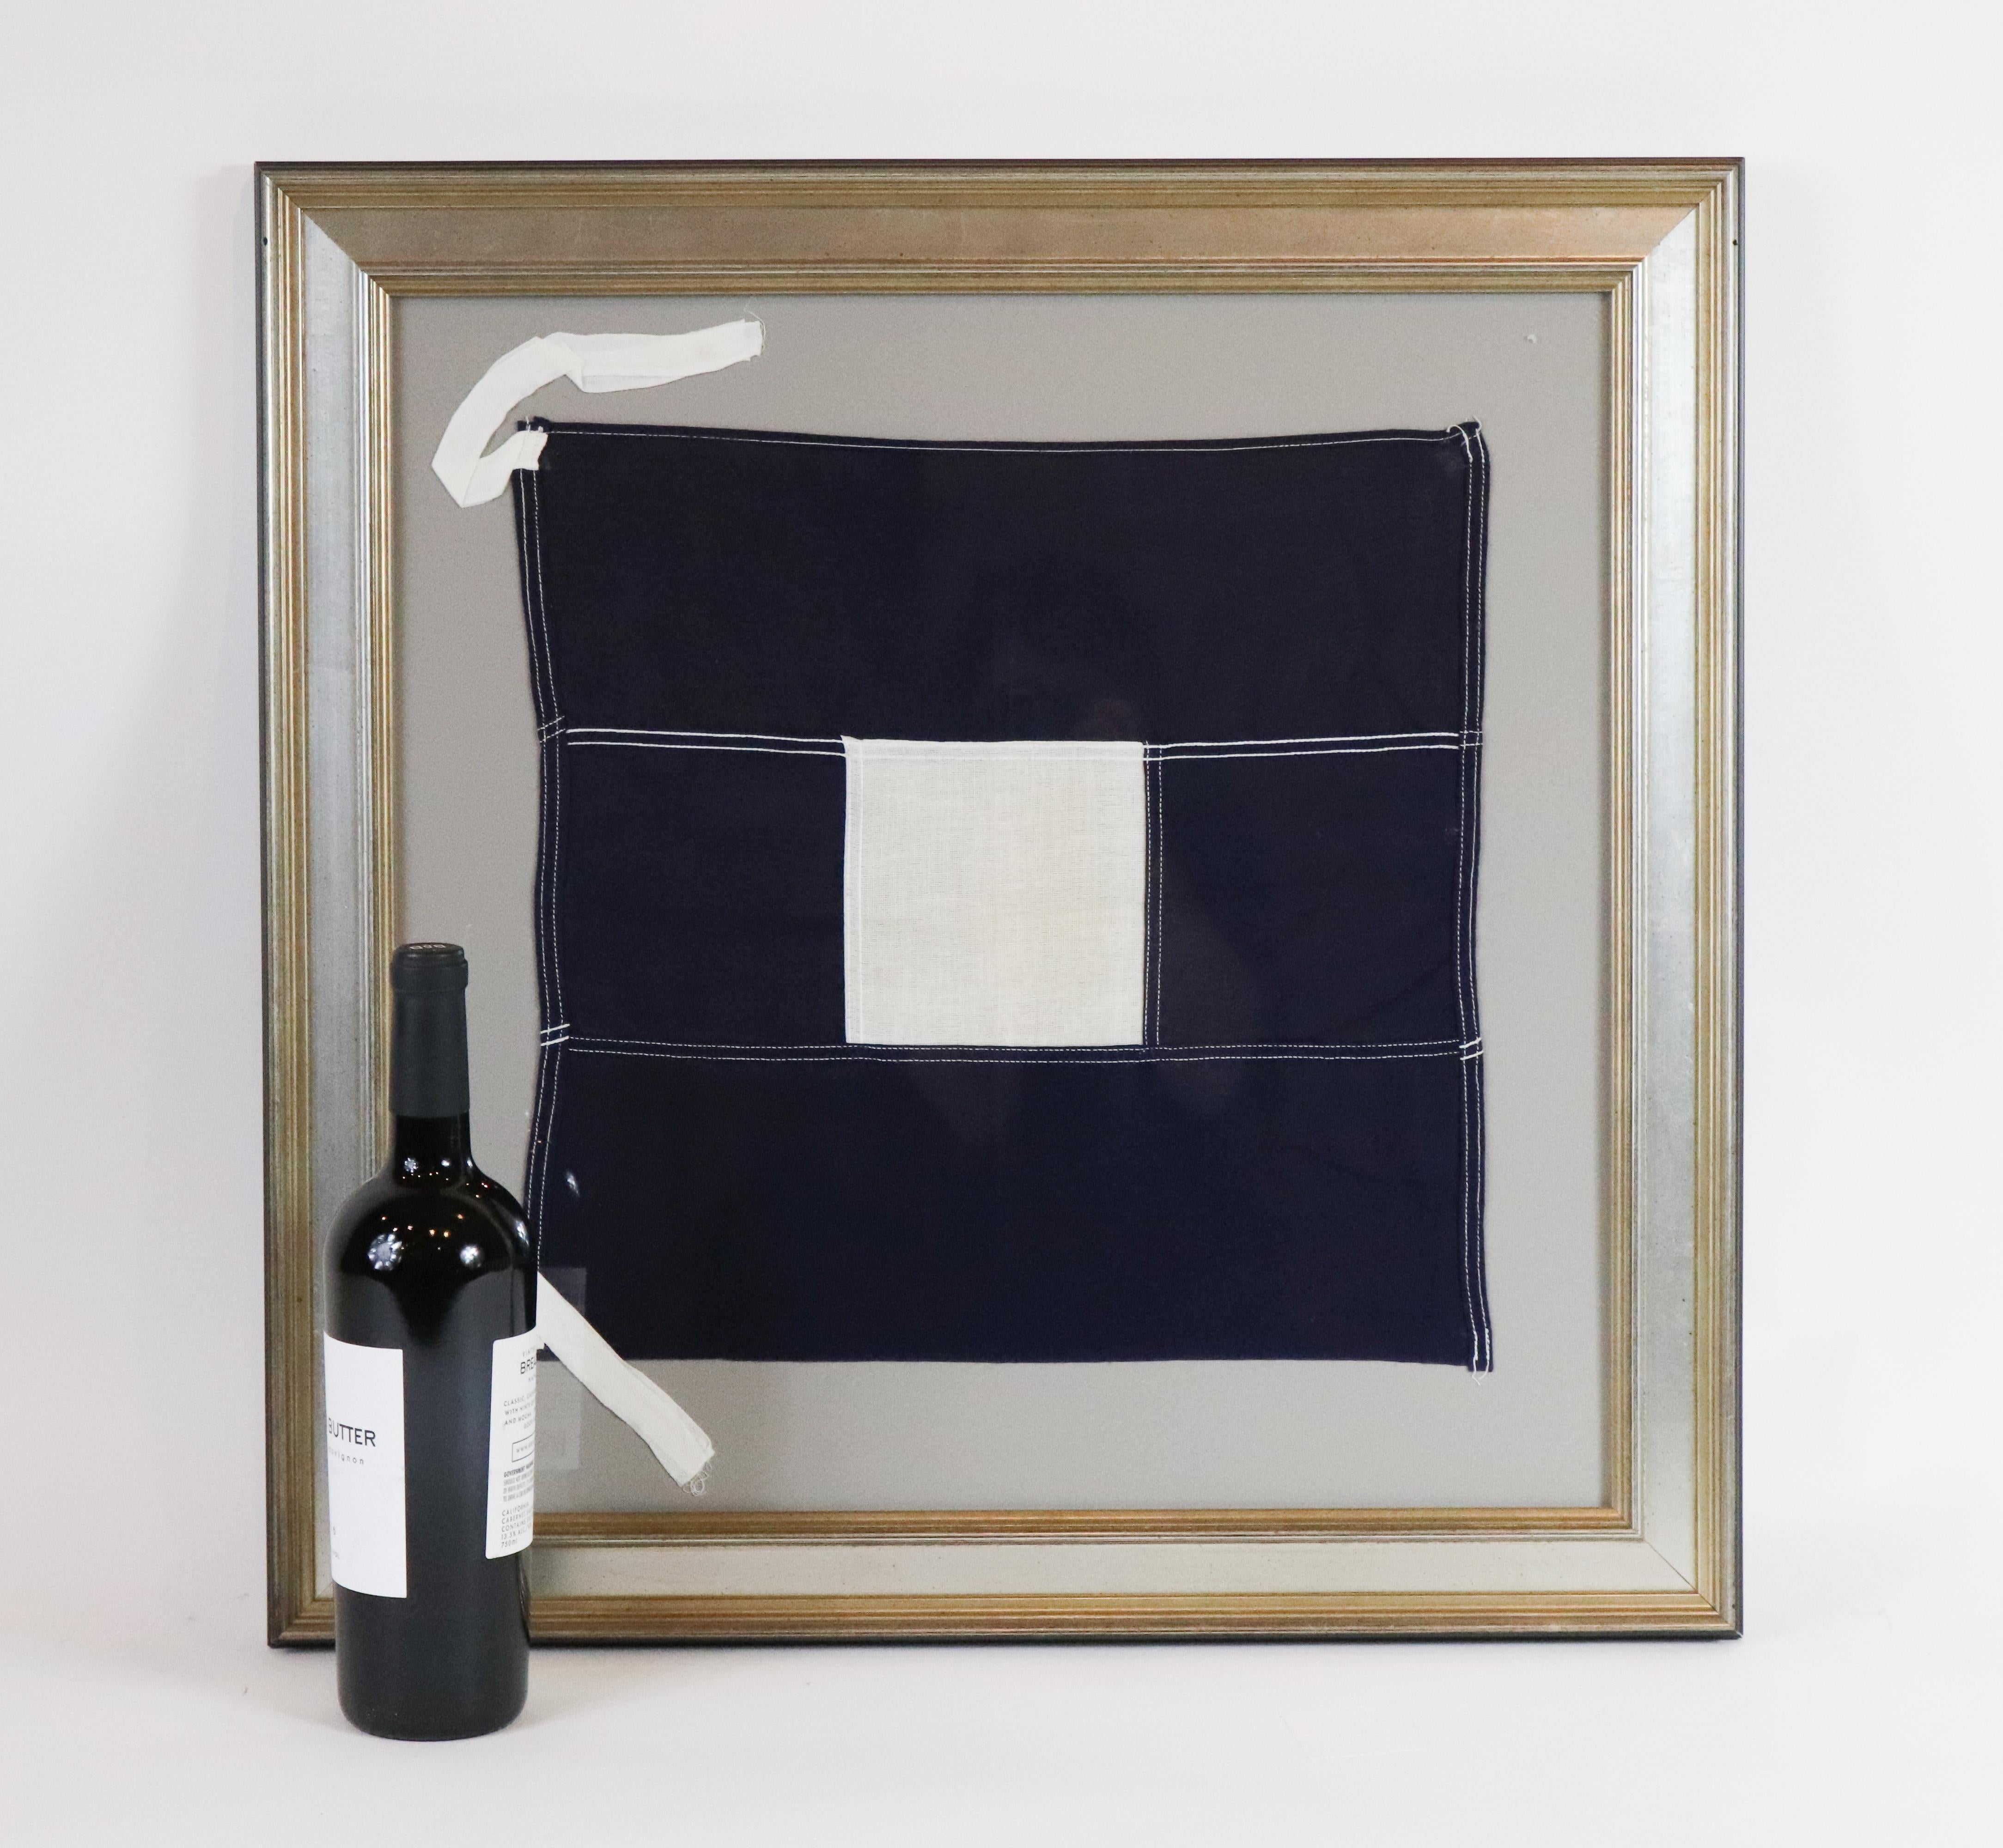 Framed nautical flag. International code of signals for the letter P, otherwise known as The Blue Peter sharing two meanings:

In harbour: All persons should report on board as the vessel is about to proceed to sea.

At sea: It may be used by